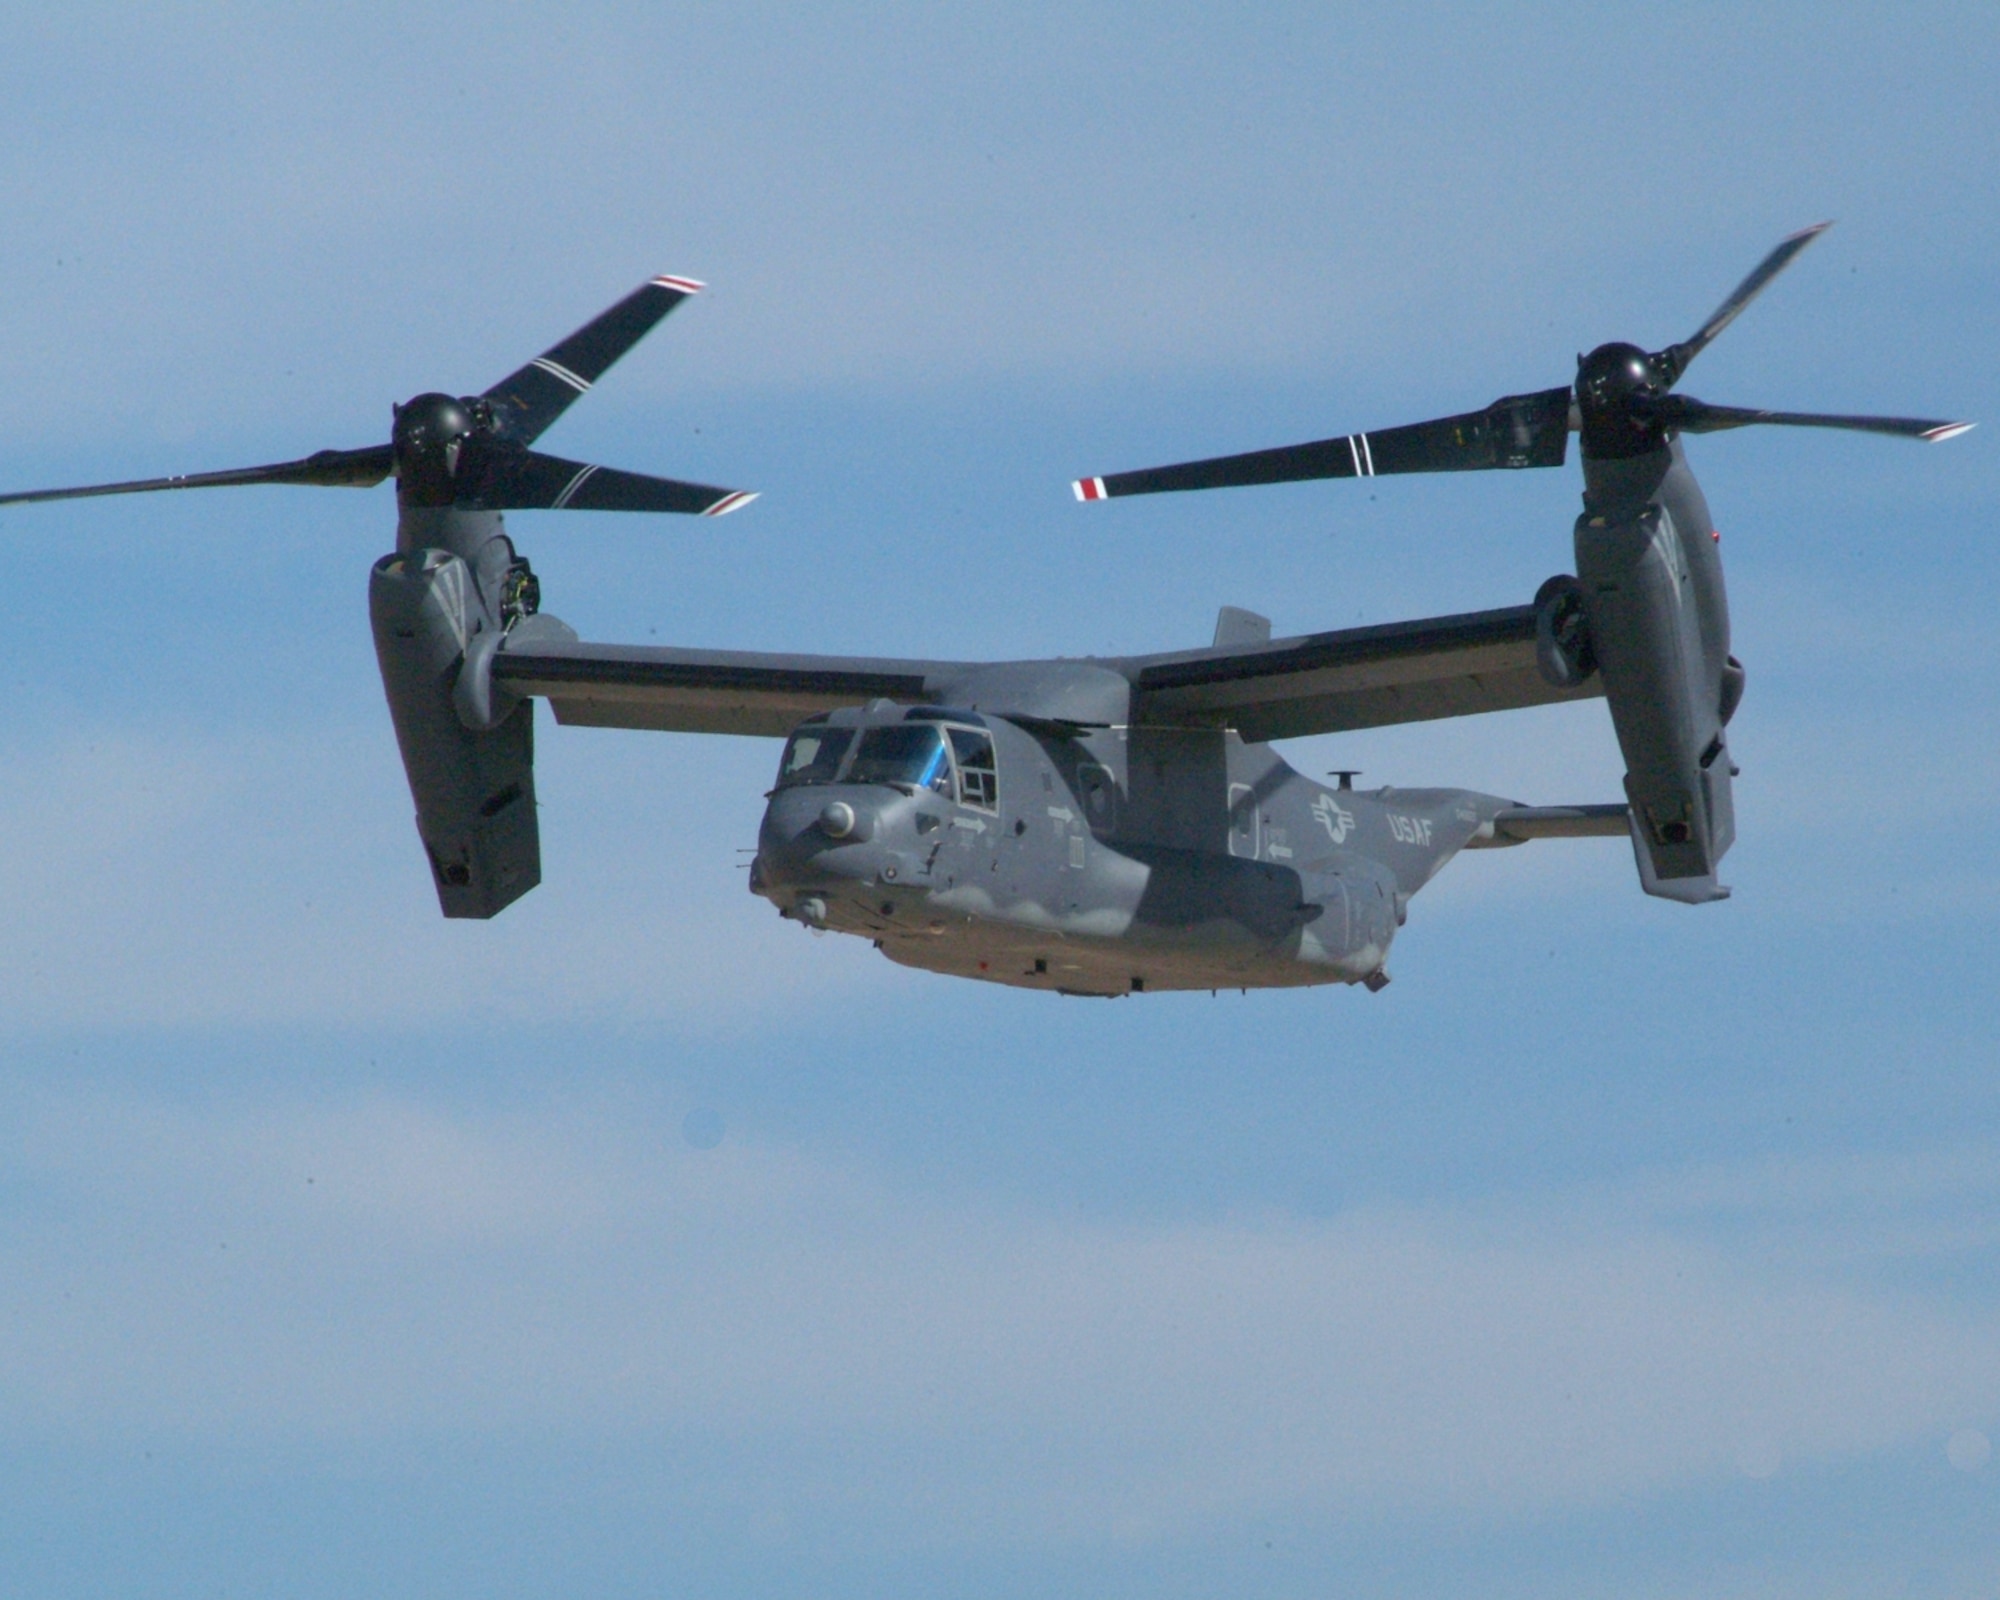 The first Block B/10 CV-22 converts between airplane and helicopter modes during a flight at the Bell Helicopter facility in Amarillo, Texas. (Photo courtesy Bell Helicopter)